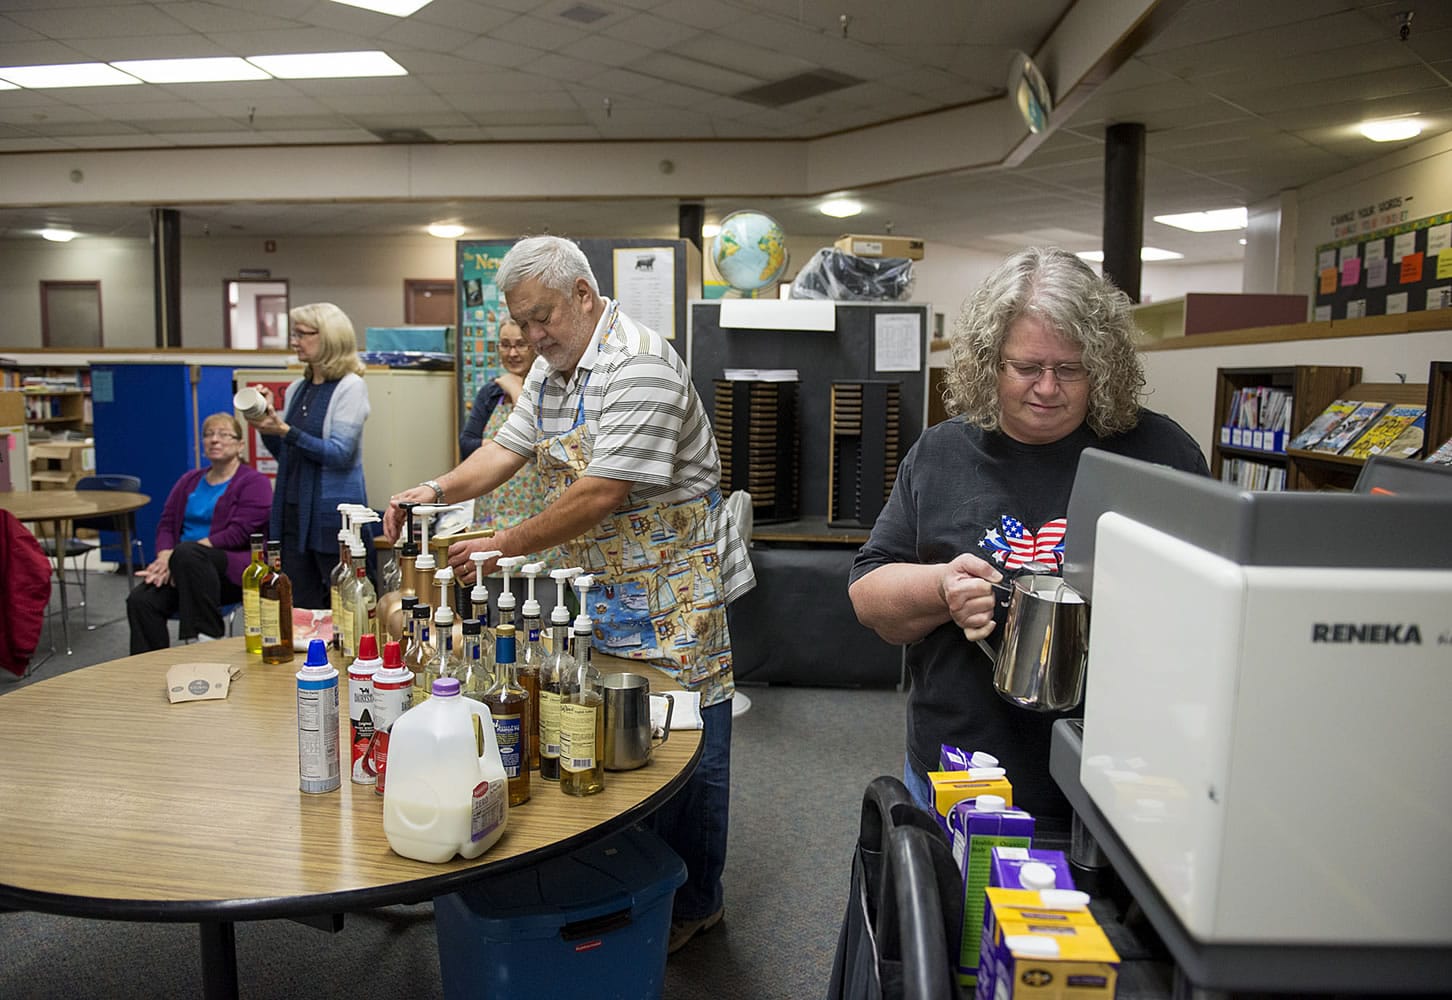 Northside Baptist Church members John Martin, center, and Cathy White, right, prepare coffee drinks for teachers and staff during a coffee cart event Nov. 10 at Gaiser Middle School. Volunteers from the church visit Gaiser and four elementary schools each month to treat teachers.